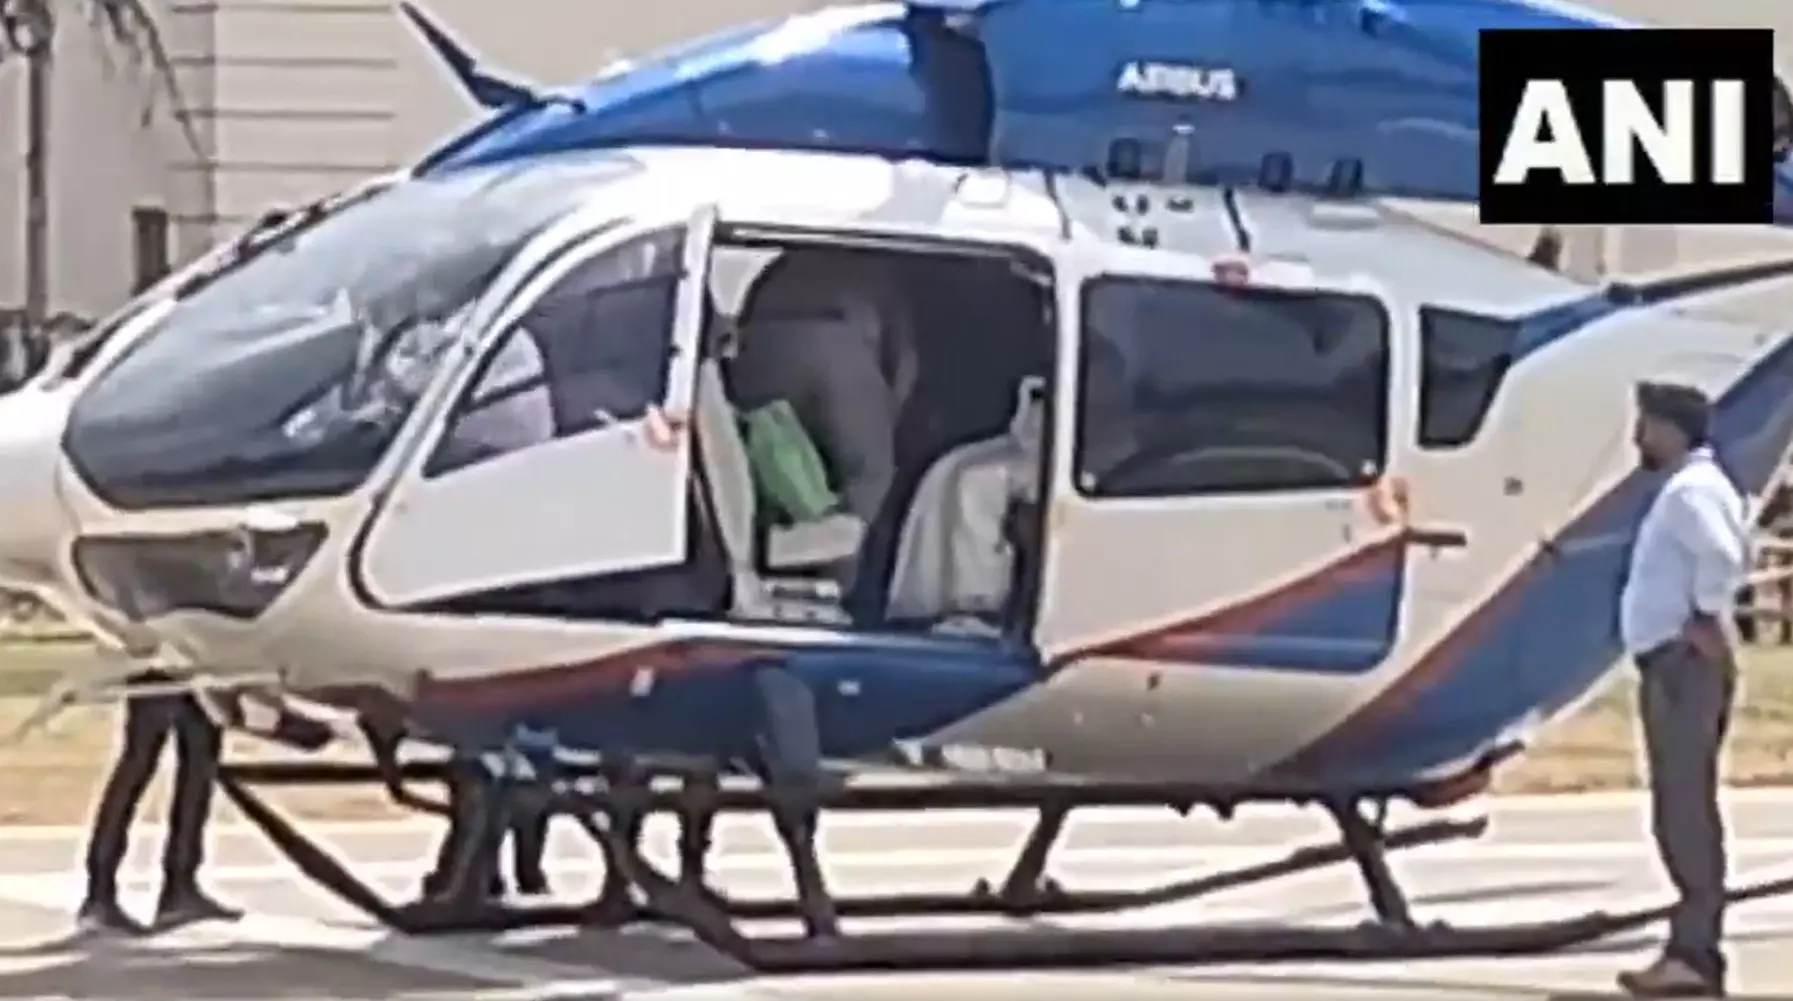 Mamata trips and falls while boarding helicopter on way to Kulti rally